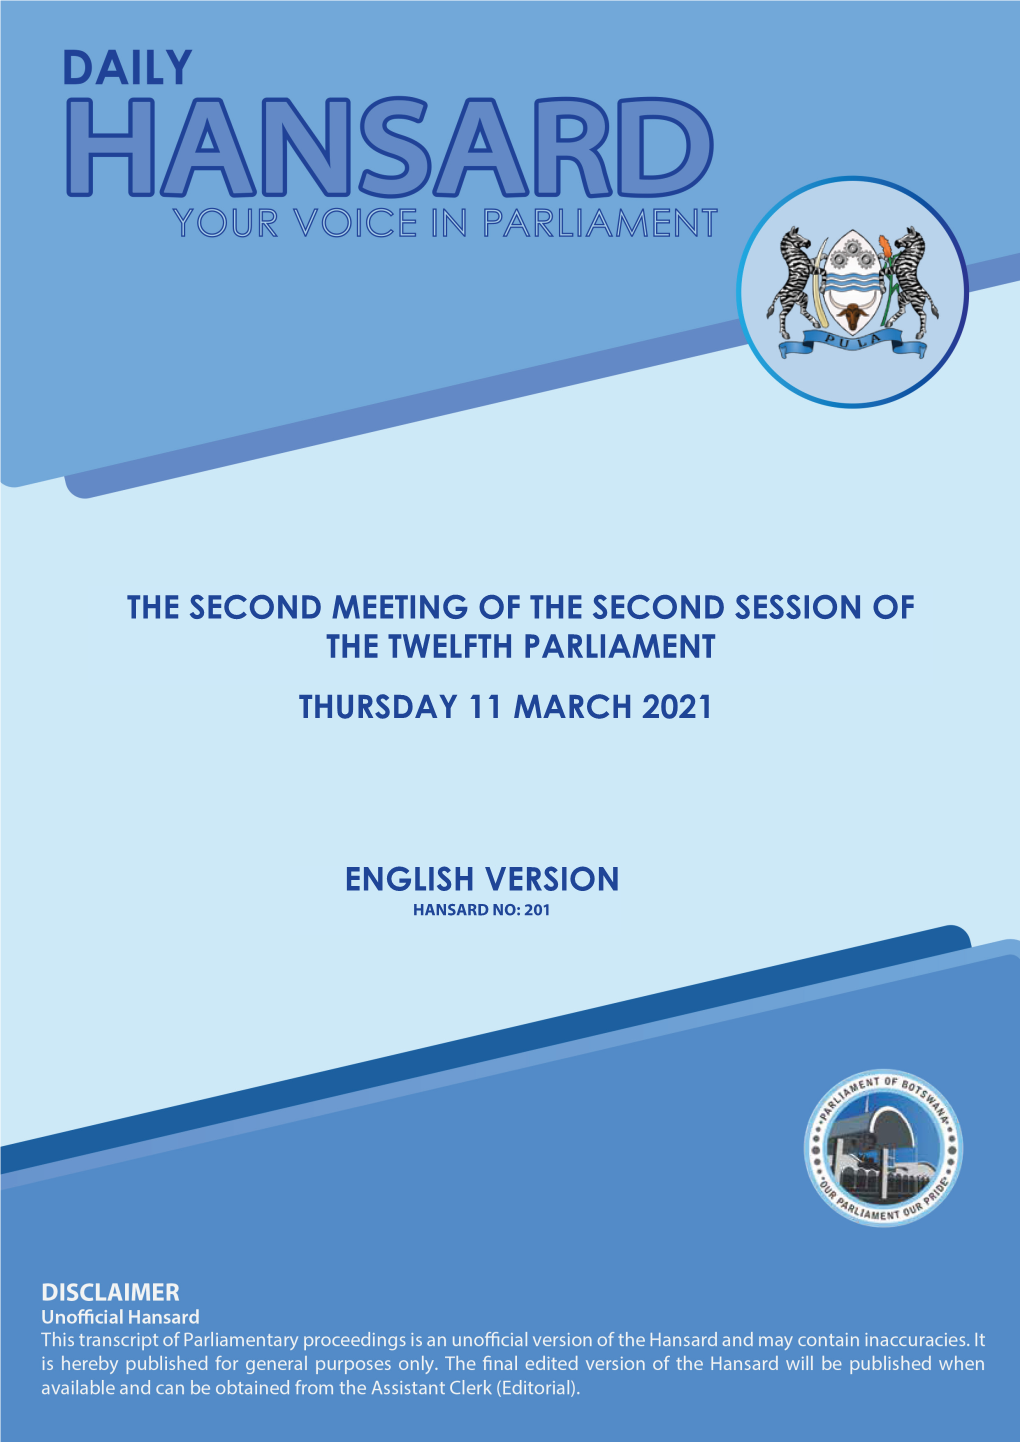 Thursday 11 March 2021 the Second Meeting of The